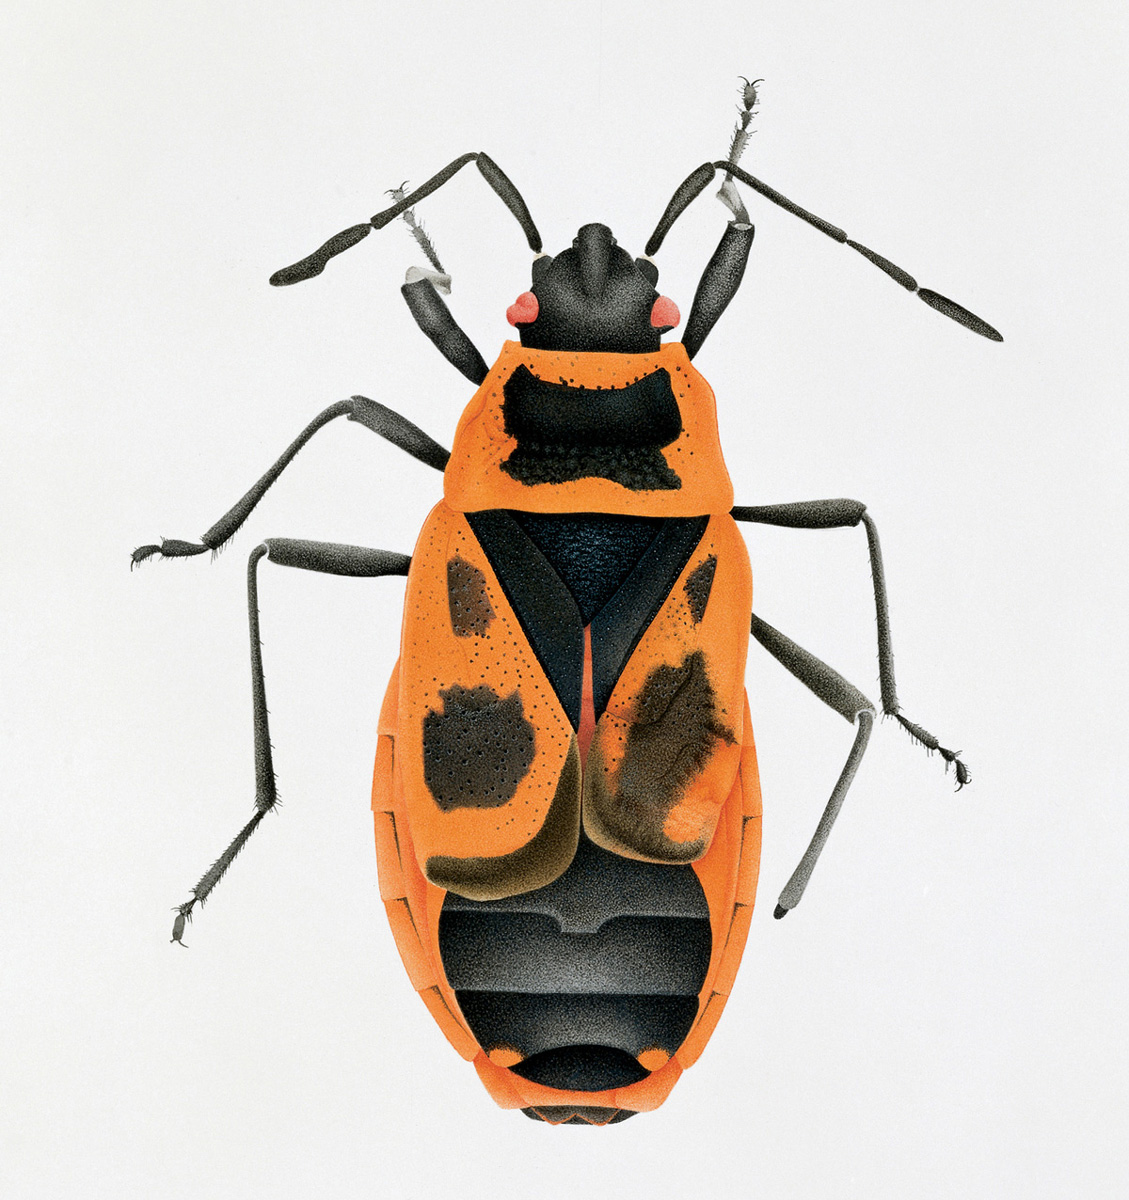 A nineteen ninety one drawing by artist Cornelia Hesse-Honegger of a fire bug, Phyrrhocoris apterus. This specimen from former East Berlin is badly damaged. It has a large bump on the thorax and the chitin surface is dusty and dull. The left feeler has only three segments and is misshapen. The right hind leg is deformed and missing a foot. The rims of the neck plate are damaged, and the left eye is indented.